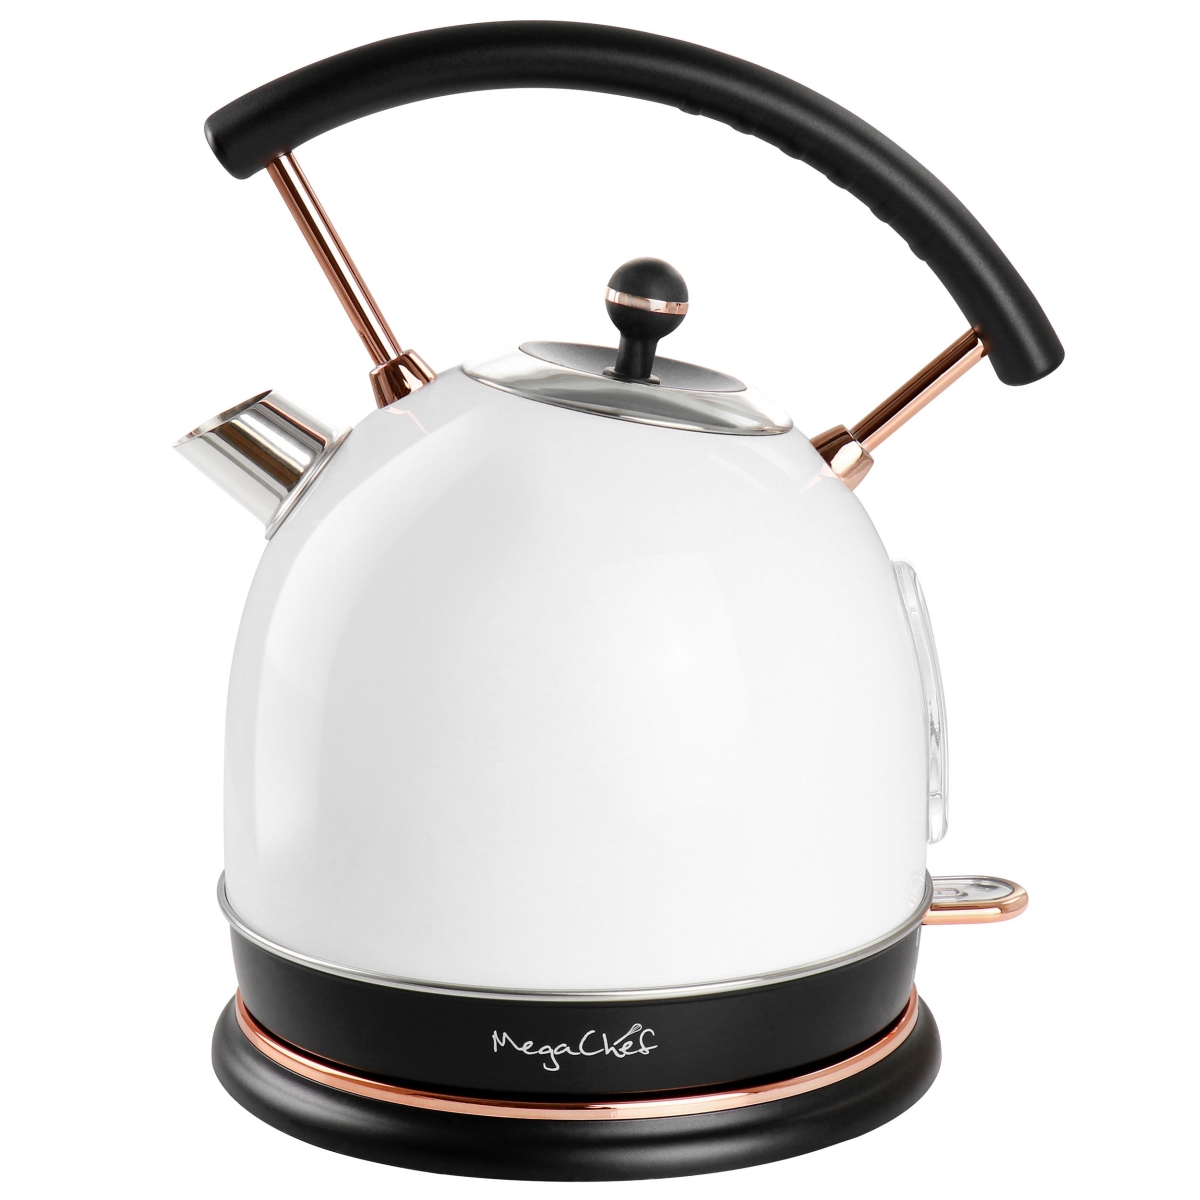 Picture of MegaChef MG-KTL1950W 1.8 Liter Half Circle Electric Tea Kettle in White